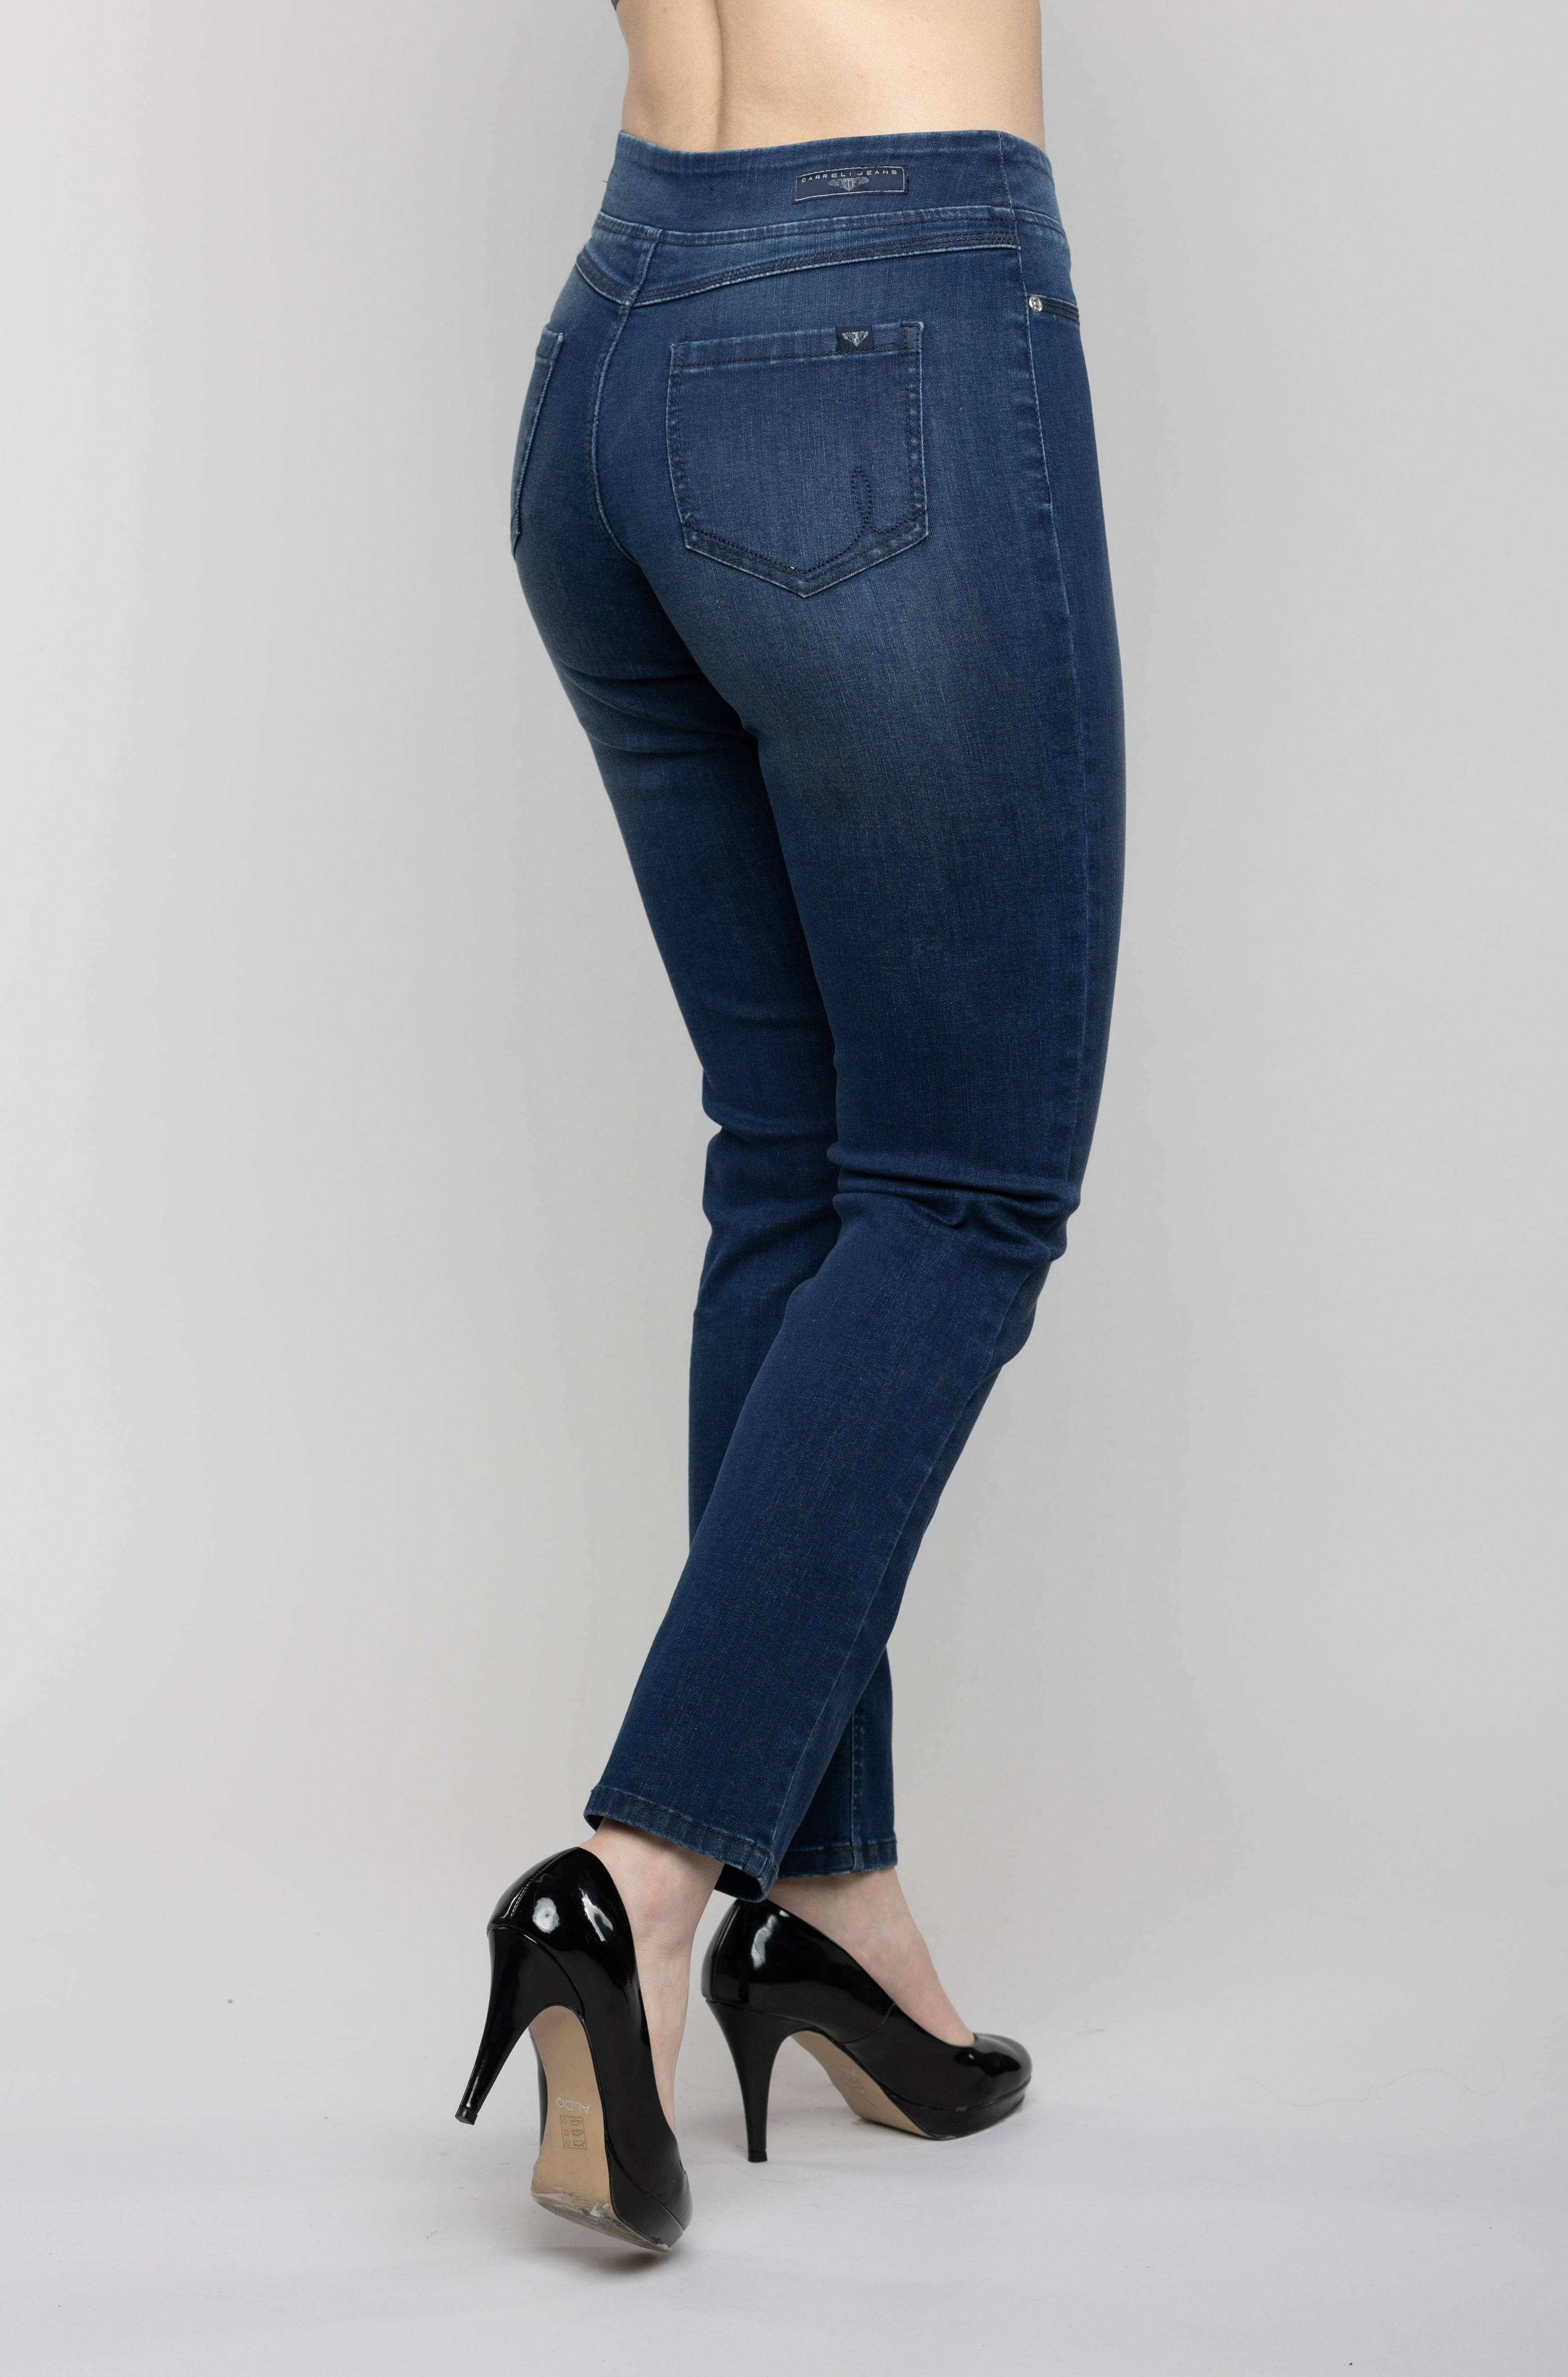 Carreli Jeans® | Angela Fit Straight Leg Pull-On in Blue Black Wash